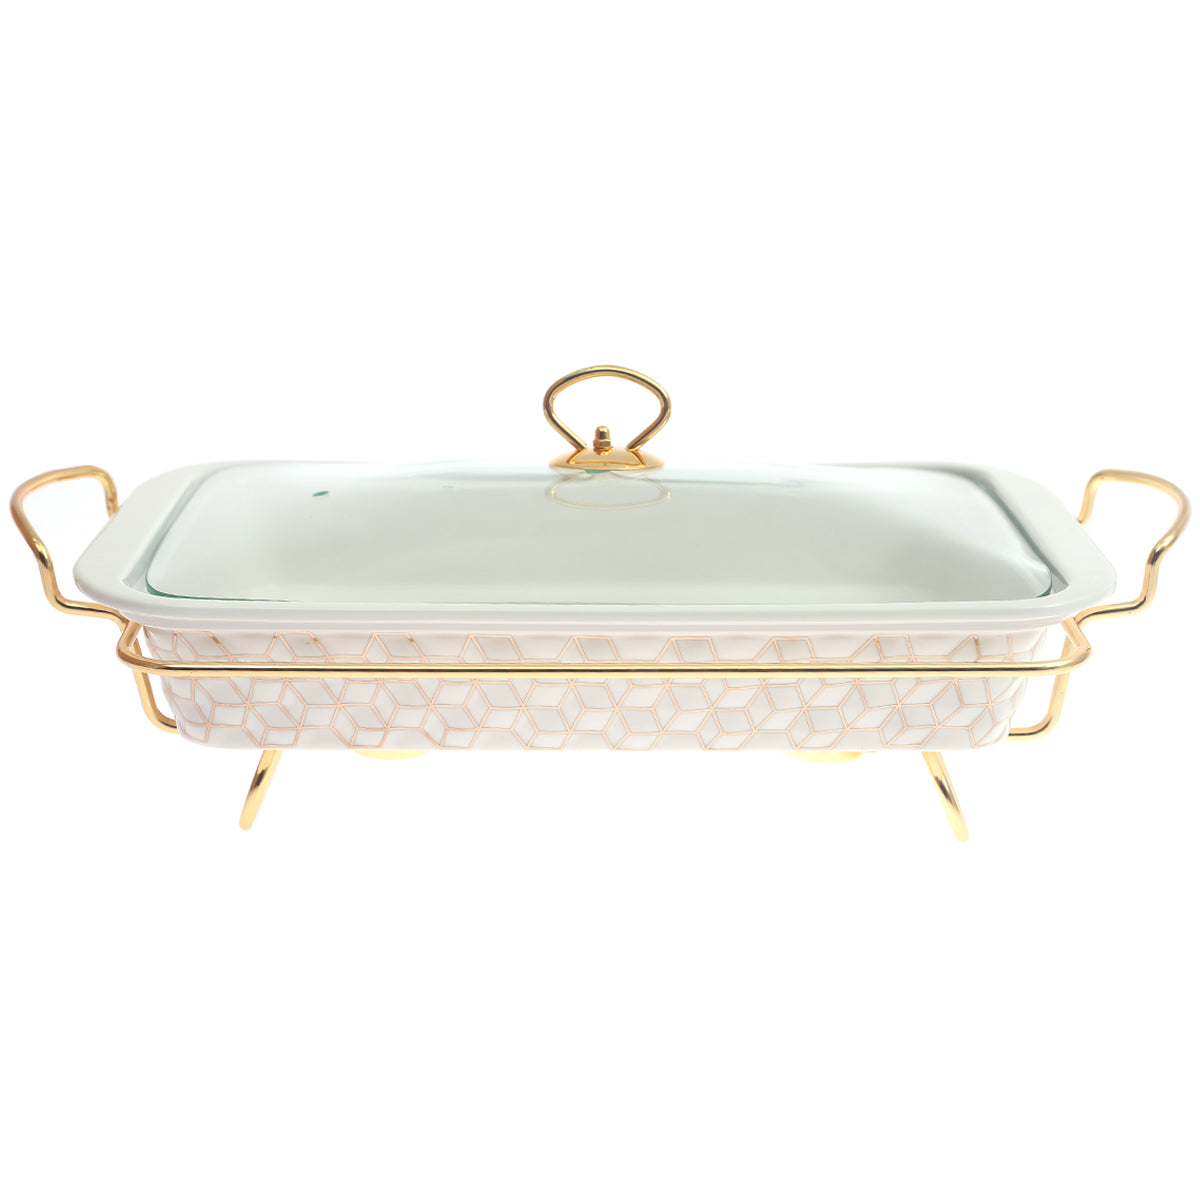 BR0148 16.5INCH RECT CASSEROLE + STAND